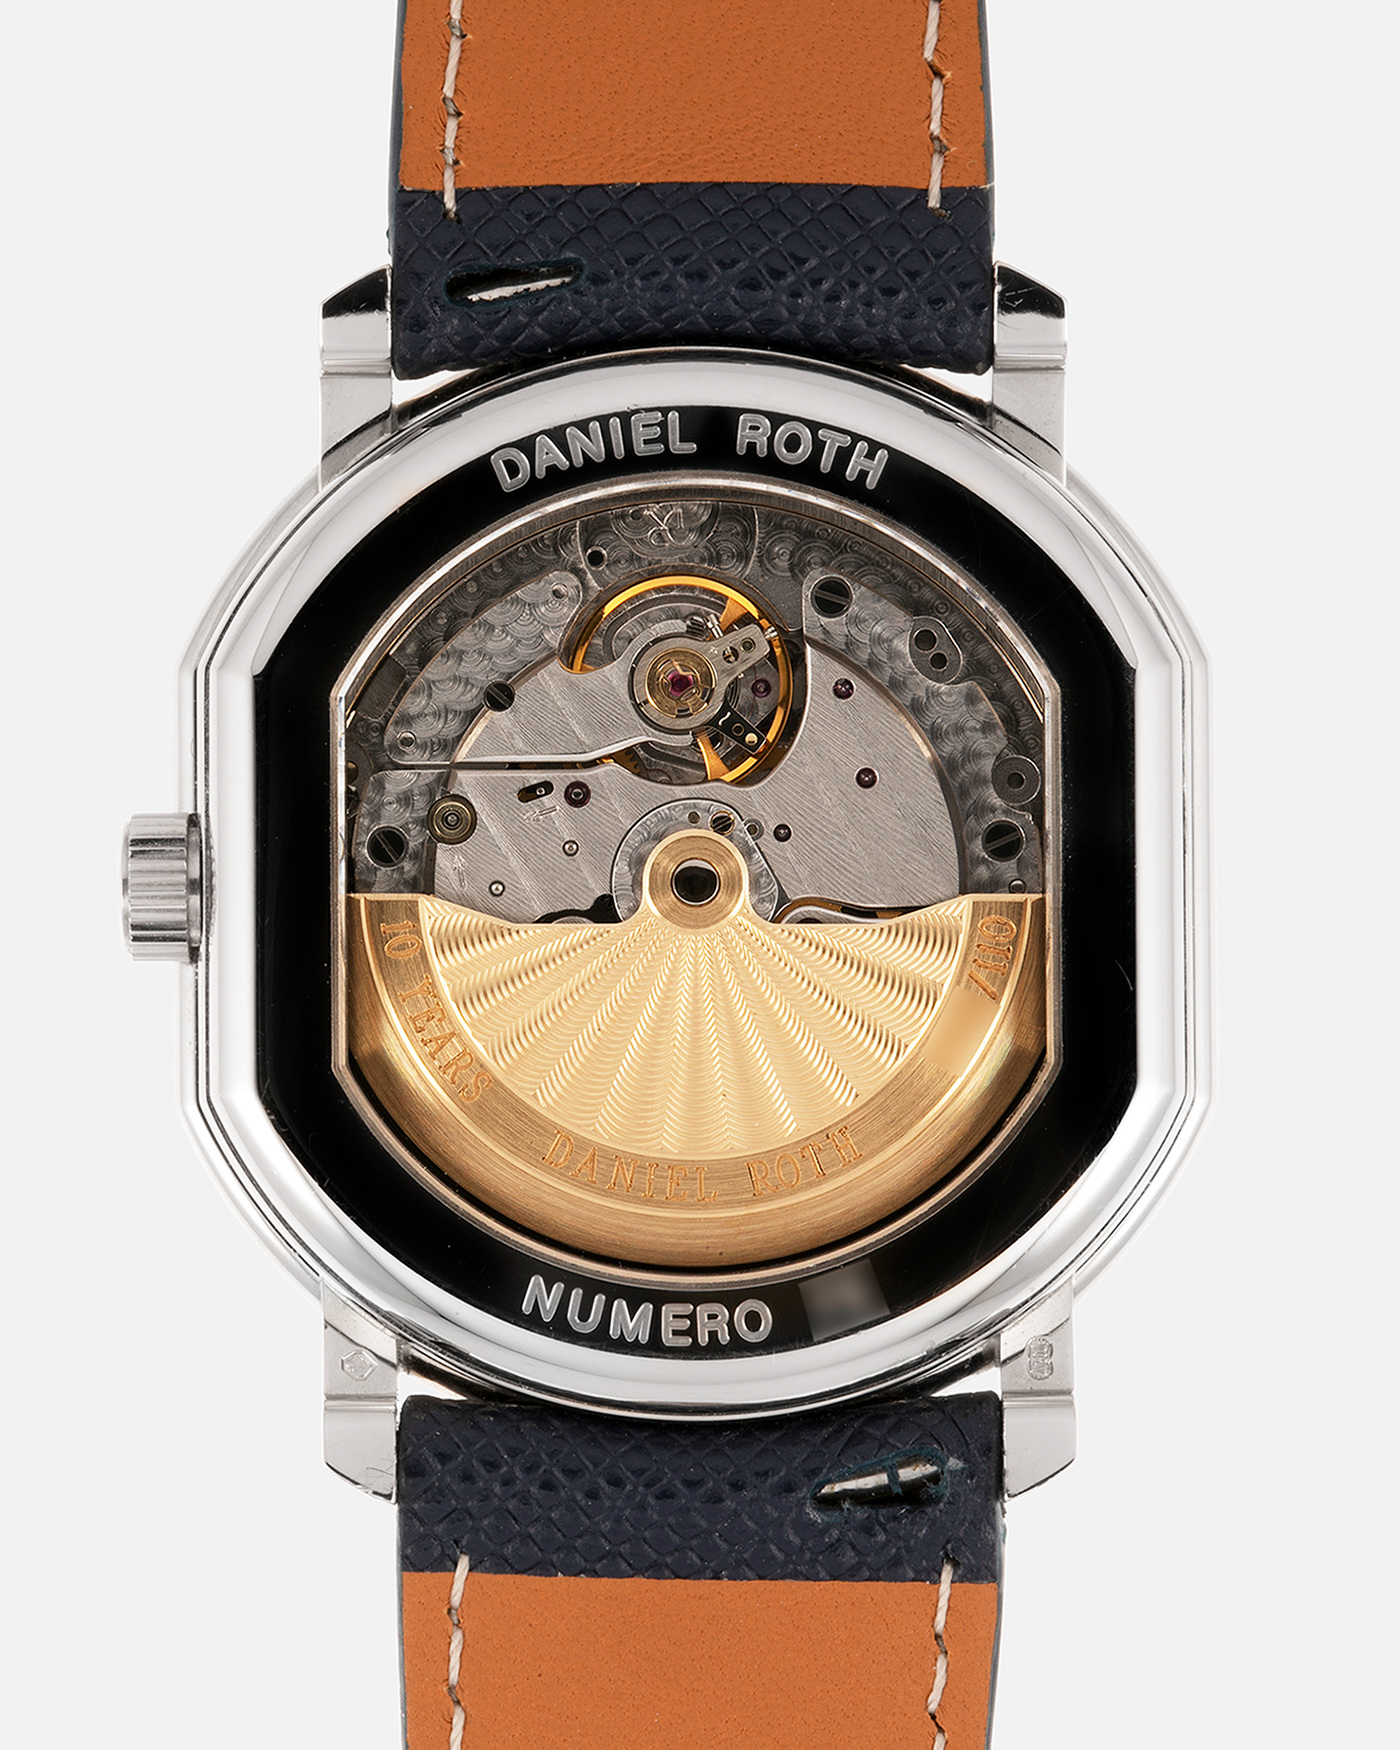 Brand: Daniel Roth Year: 1999 Model: 10th Anniversary Papillon, Limited Edition (White Gold in 110 pieces) Material: 18-carat White Gold Movement: Daniel Roth Cal. DR113, Self-Winding Case Diameter: 35mm x 41mm x 11mm Bracelet/Strap: Navy Blue Saffiano Leather Strap with Signed 18-carat White Gold Tang Buckle